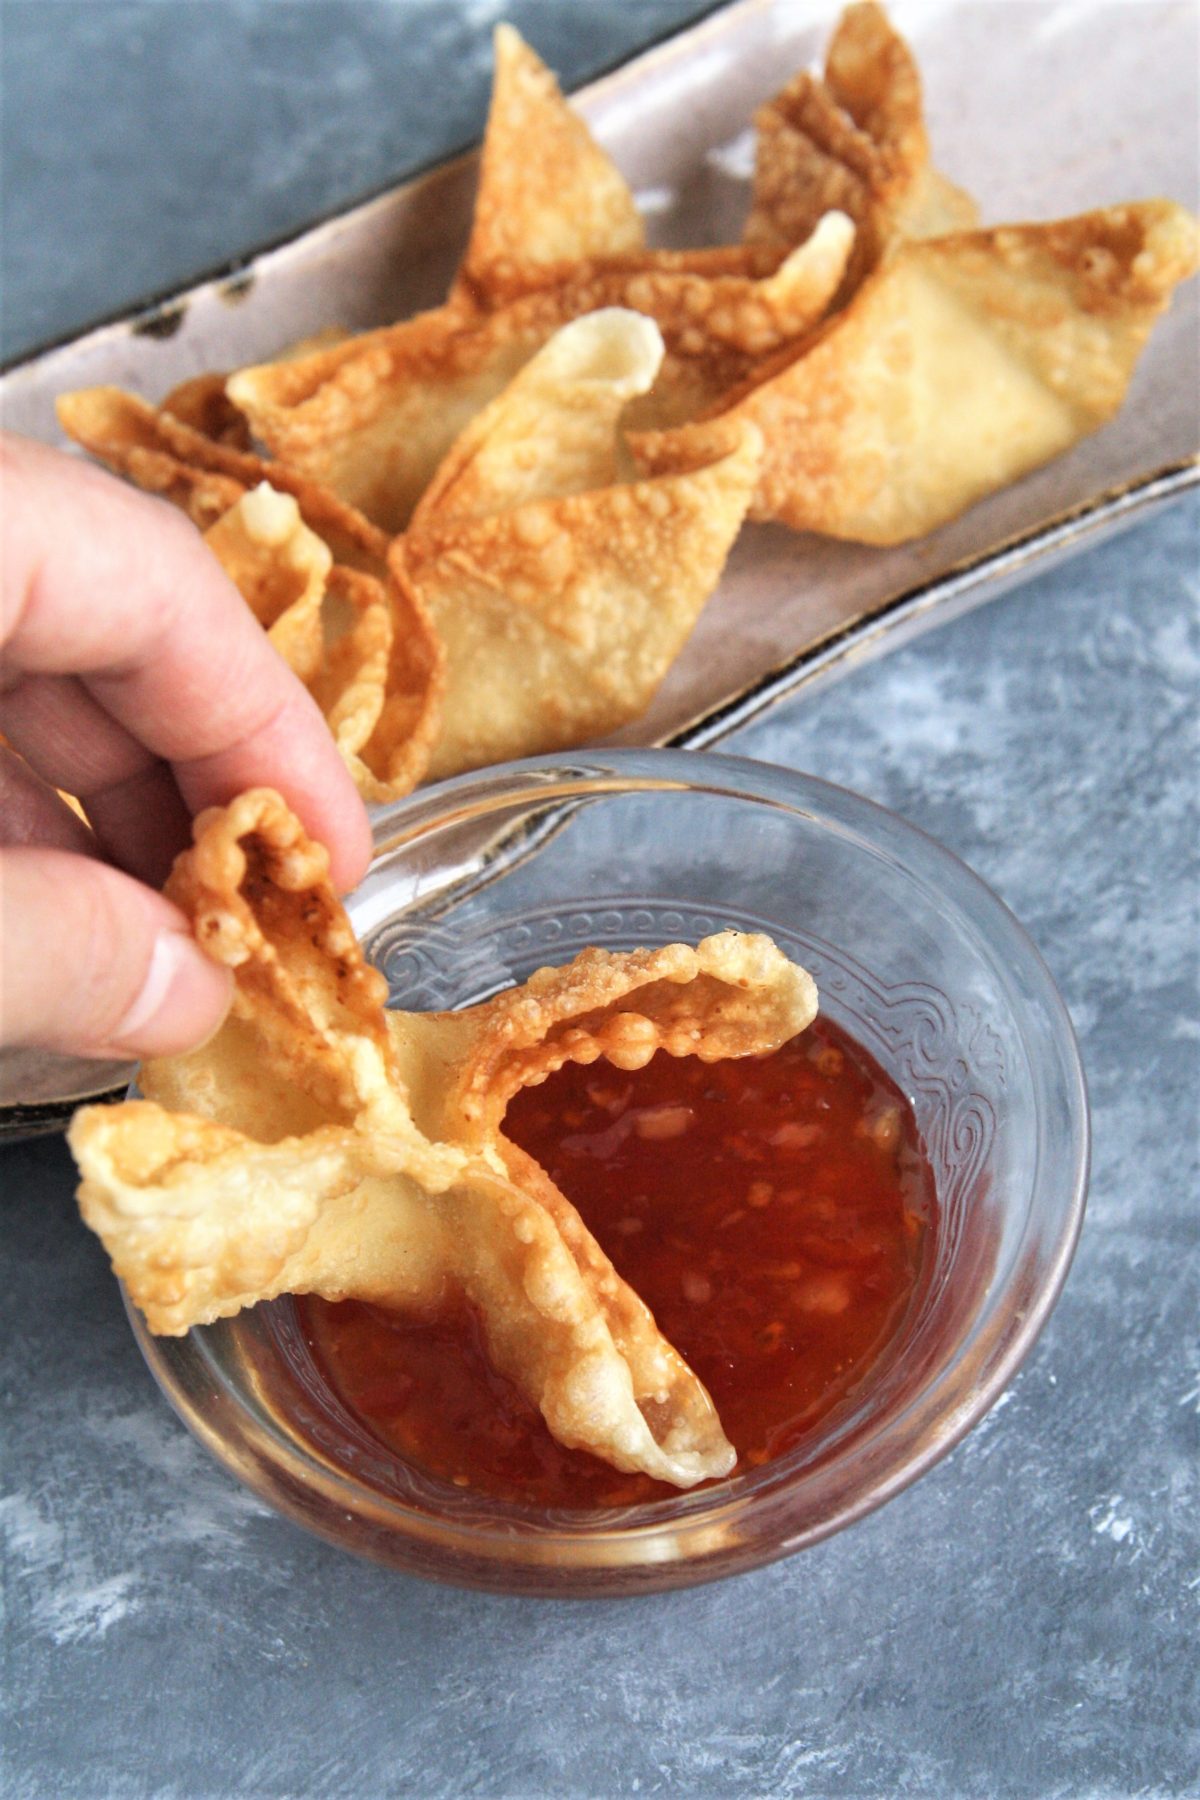 Panda Express Copycat Cream Cheese Rangoon with creamy filling and crispy wonton wrappers are a tasty appetizer - a real crowd pleaser that leaves everyone coming back for more!